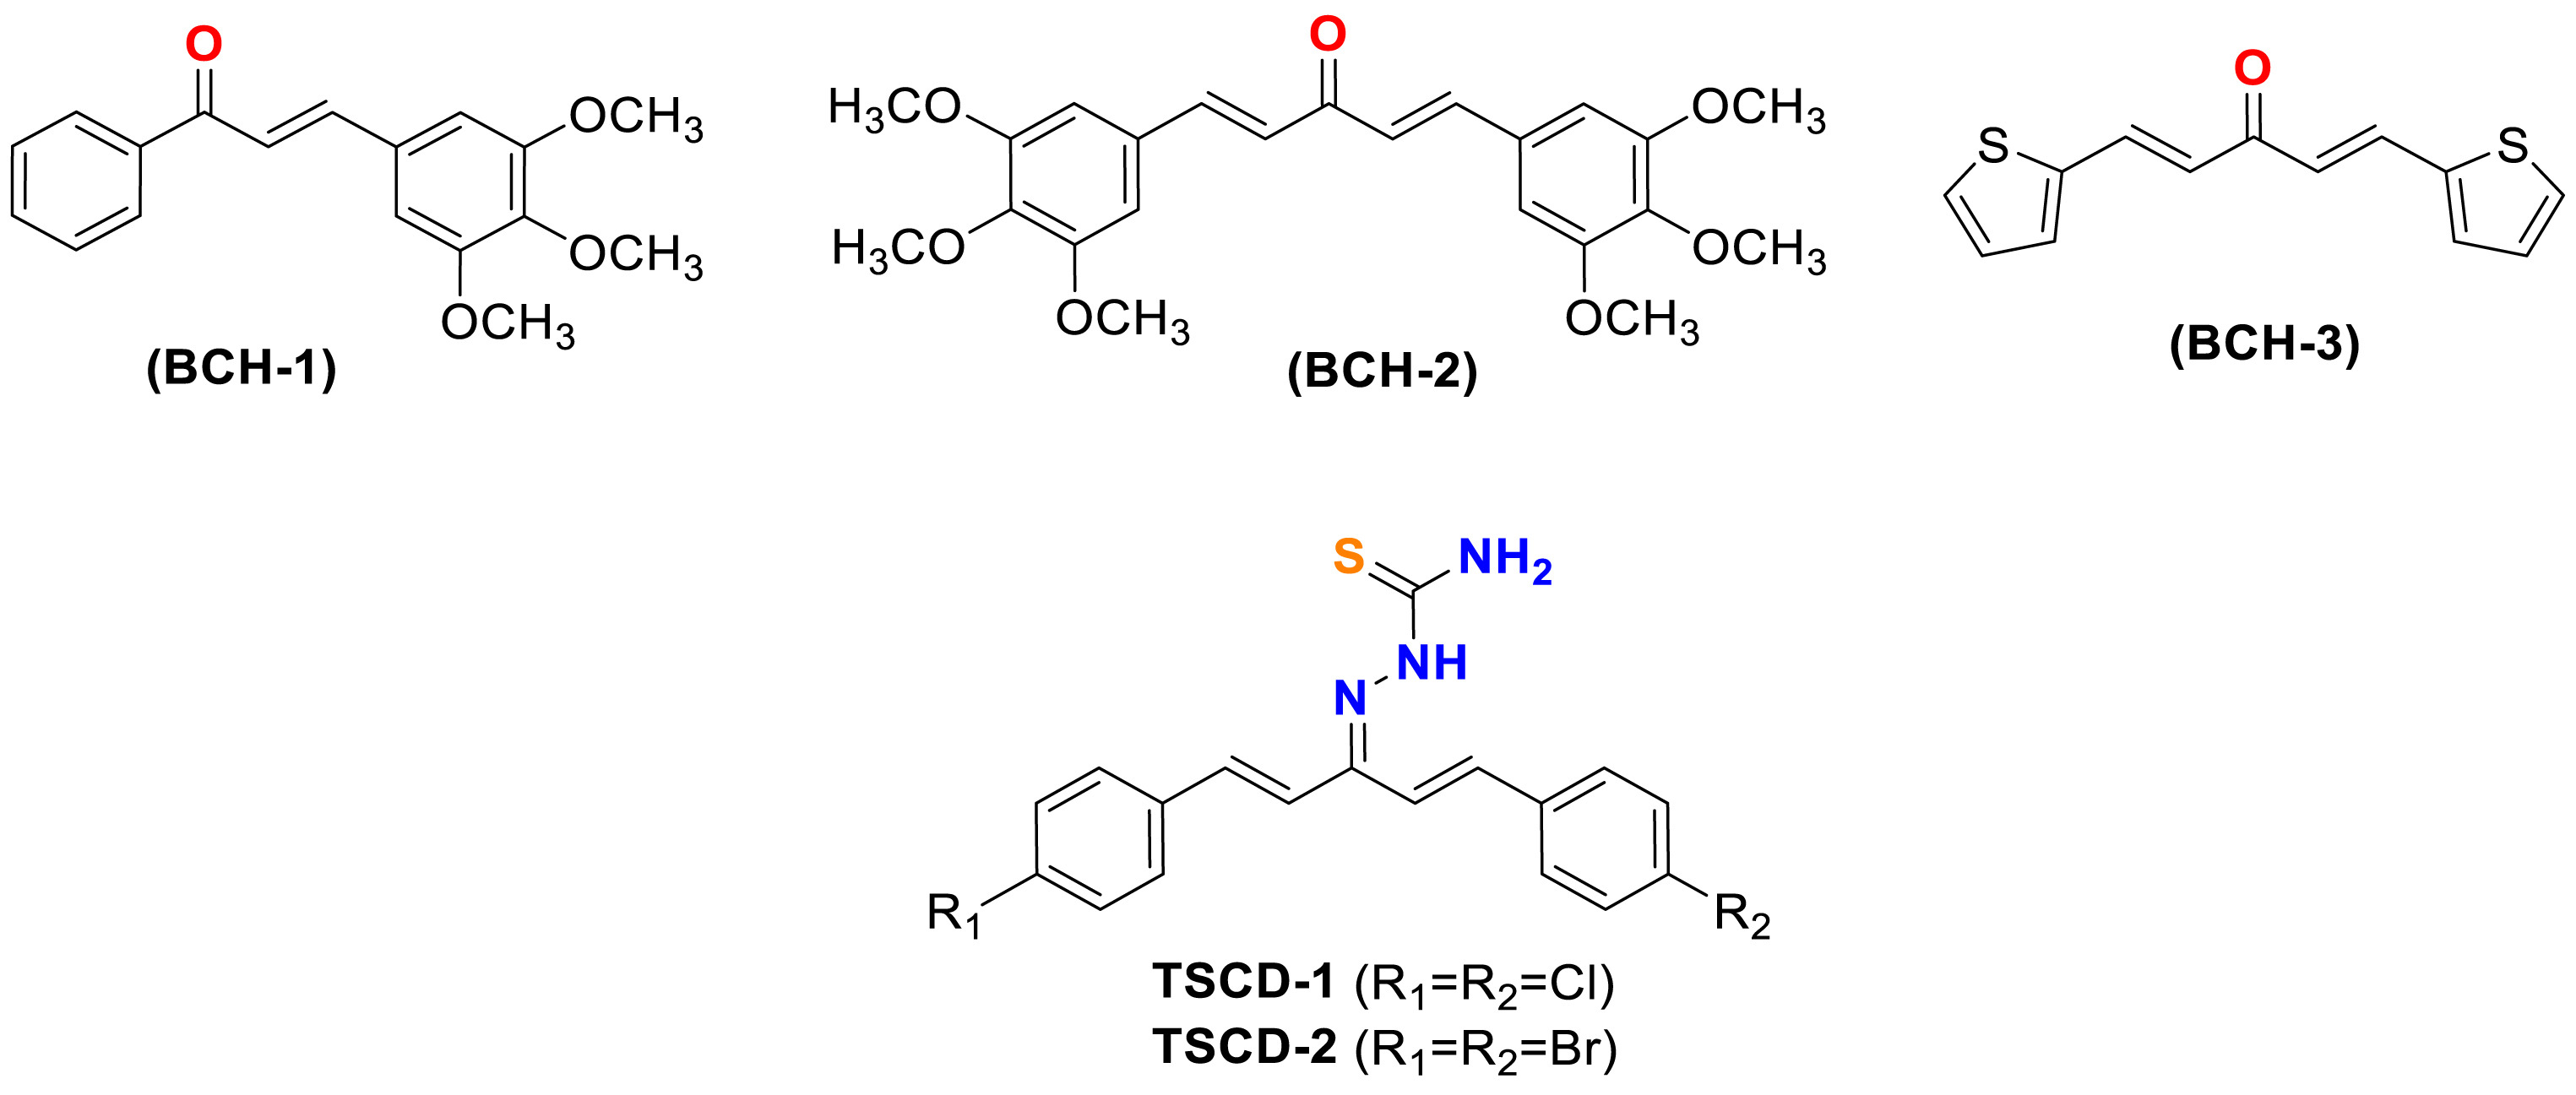 Comparing two-photon absorption of chalcone, dibenzylideneacetone and thiosemicarbazone derivatives.